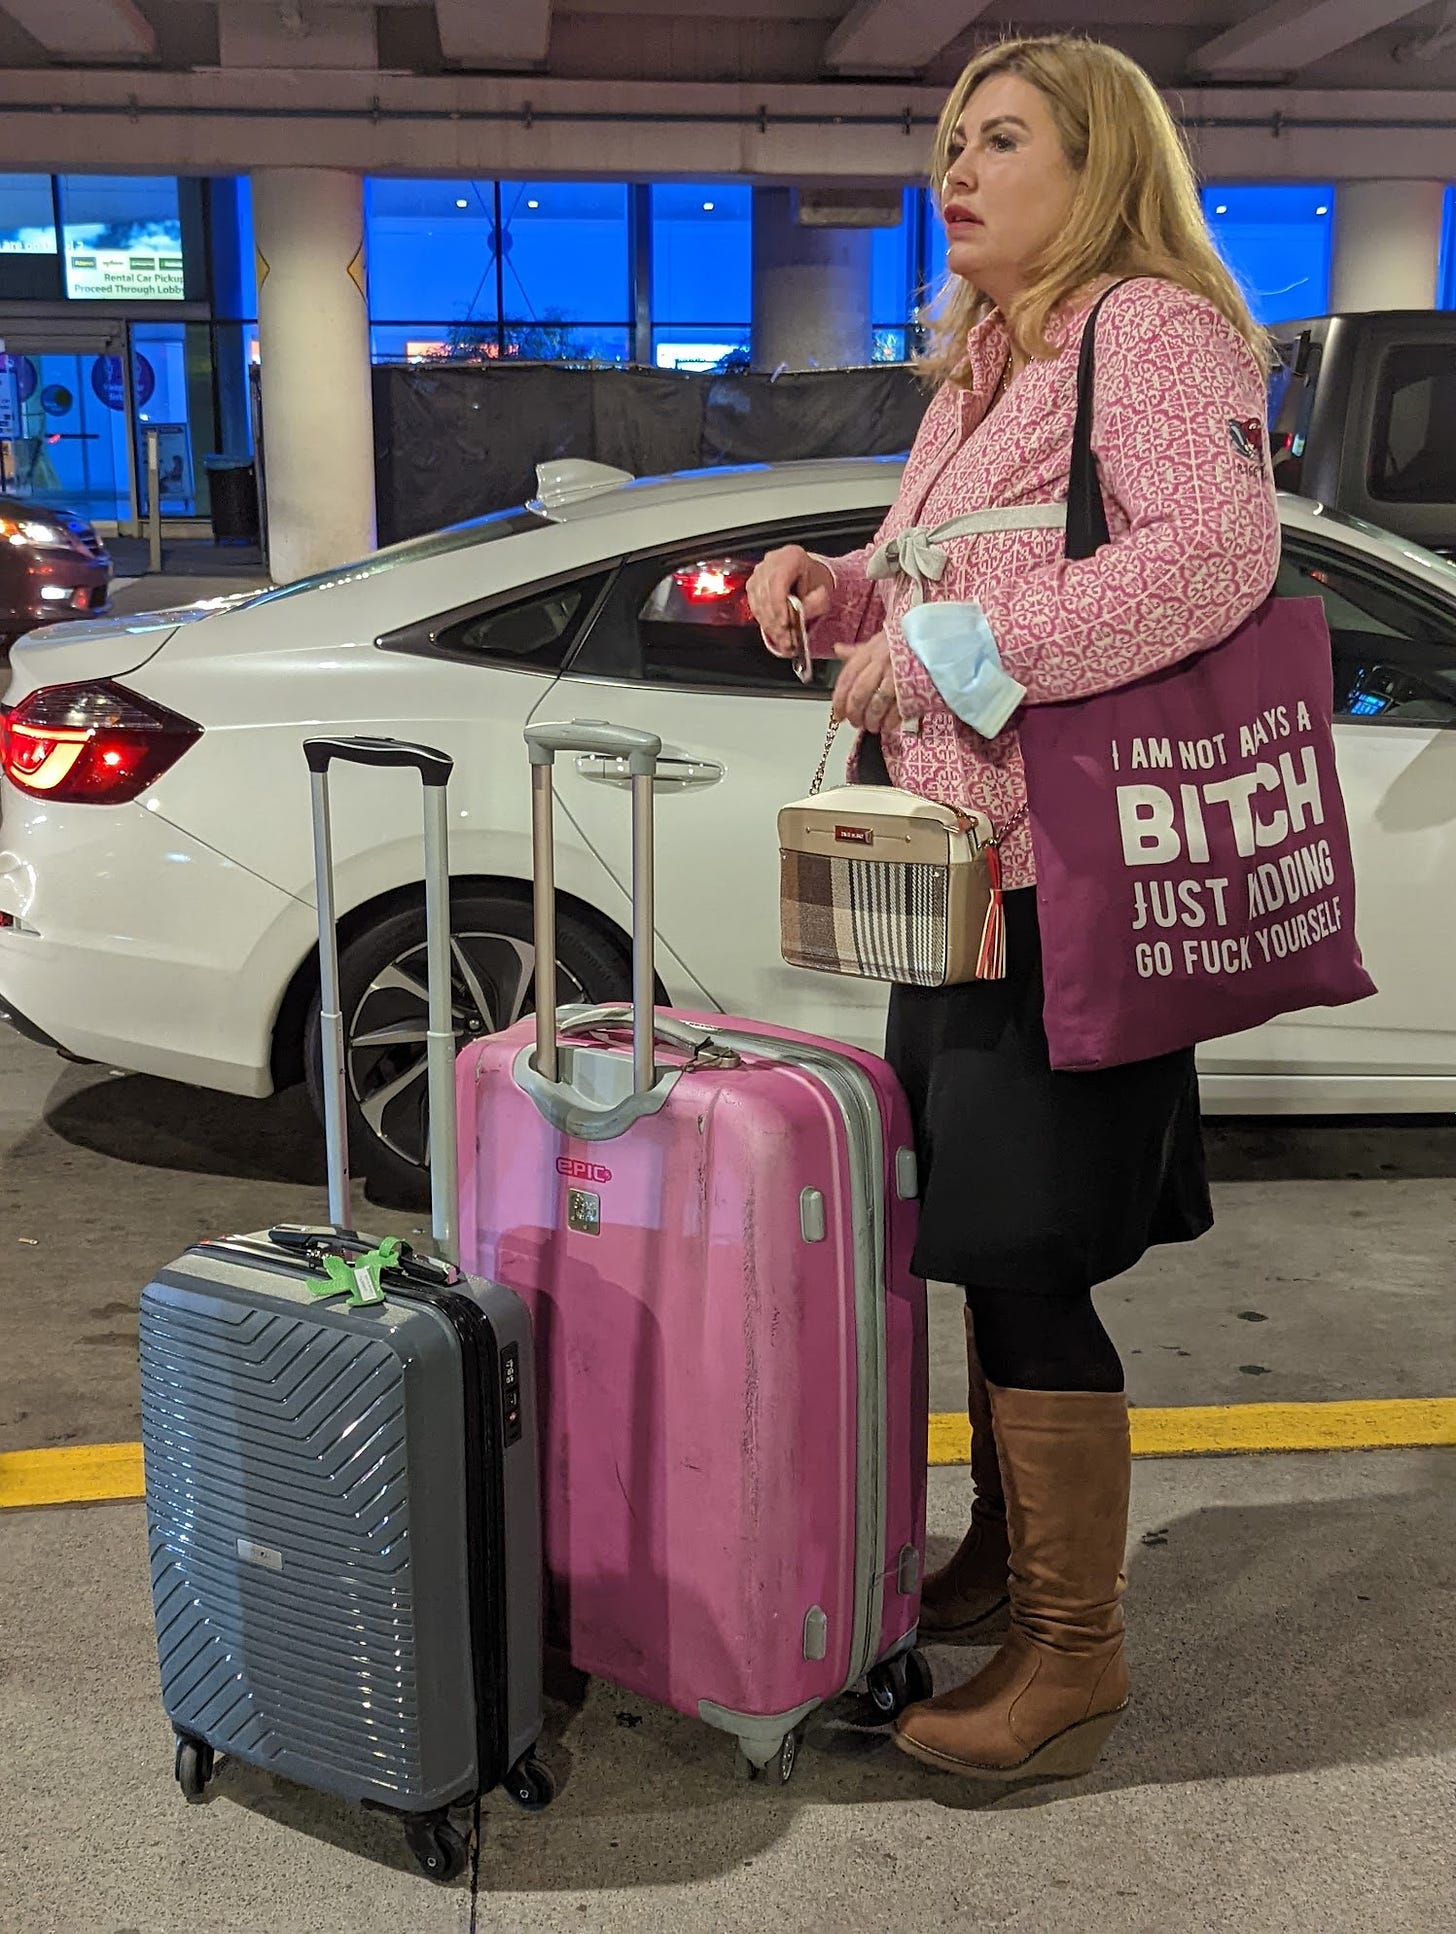 A middle-aged woman in a pink top with a large pink suitcase, carrying a violet tote bag reading: "I'm not always a bitch just kidding go fuck yourself."